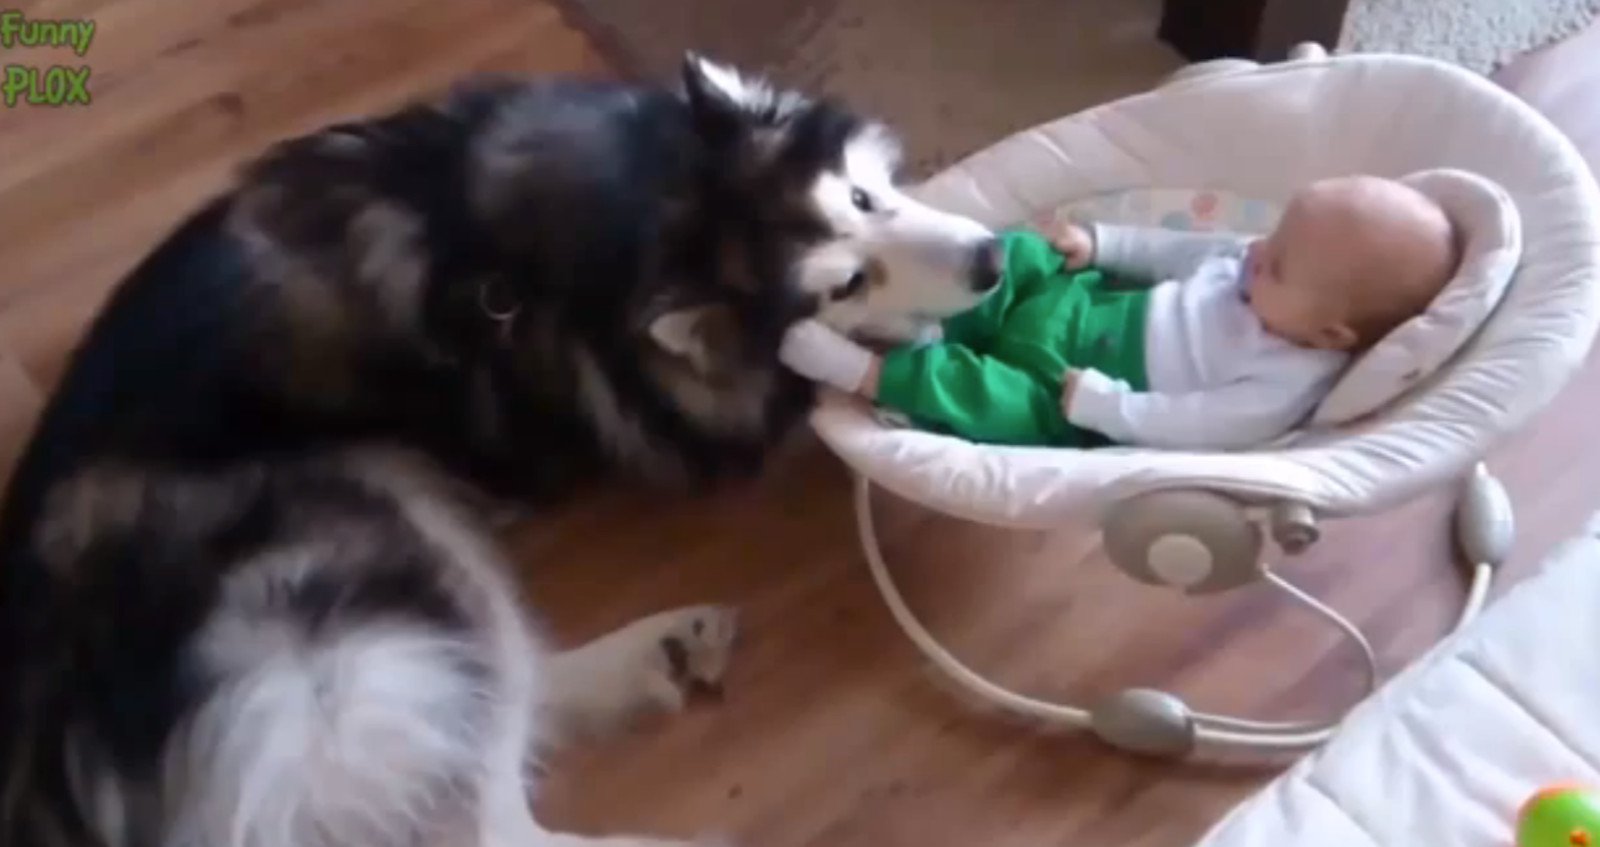 Dogs Protecting Babies Are Cute and Funny (Videos)